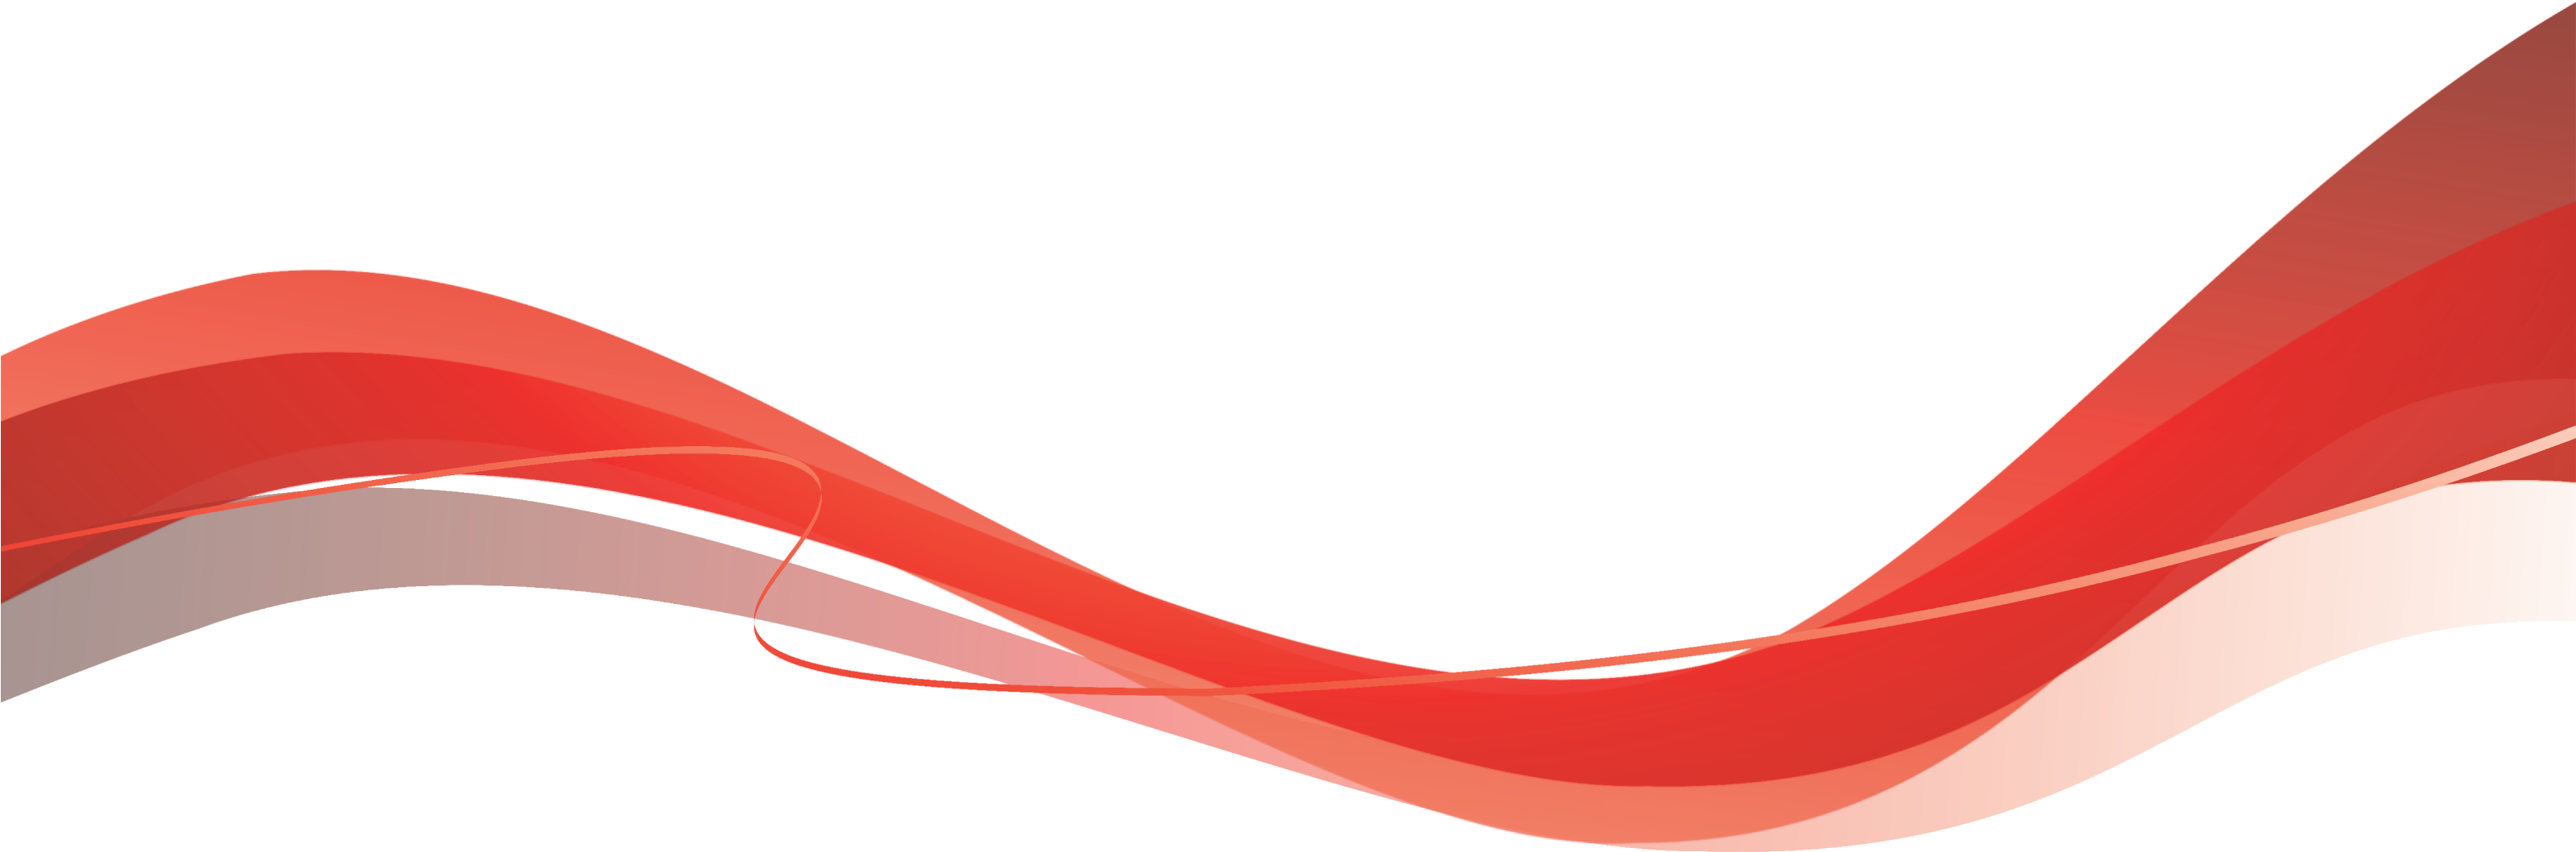 Clip Arts Related To - Red Swoosh Transparent Background (3200x1232)